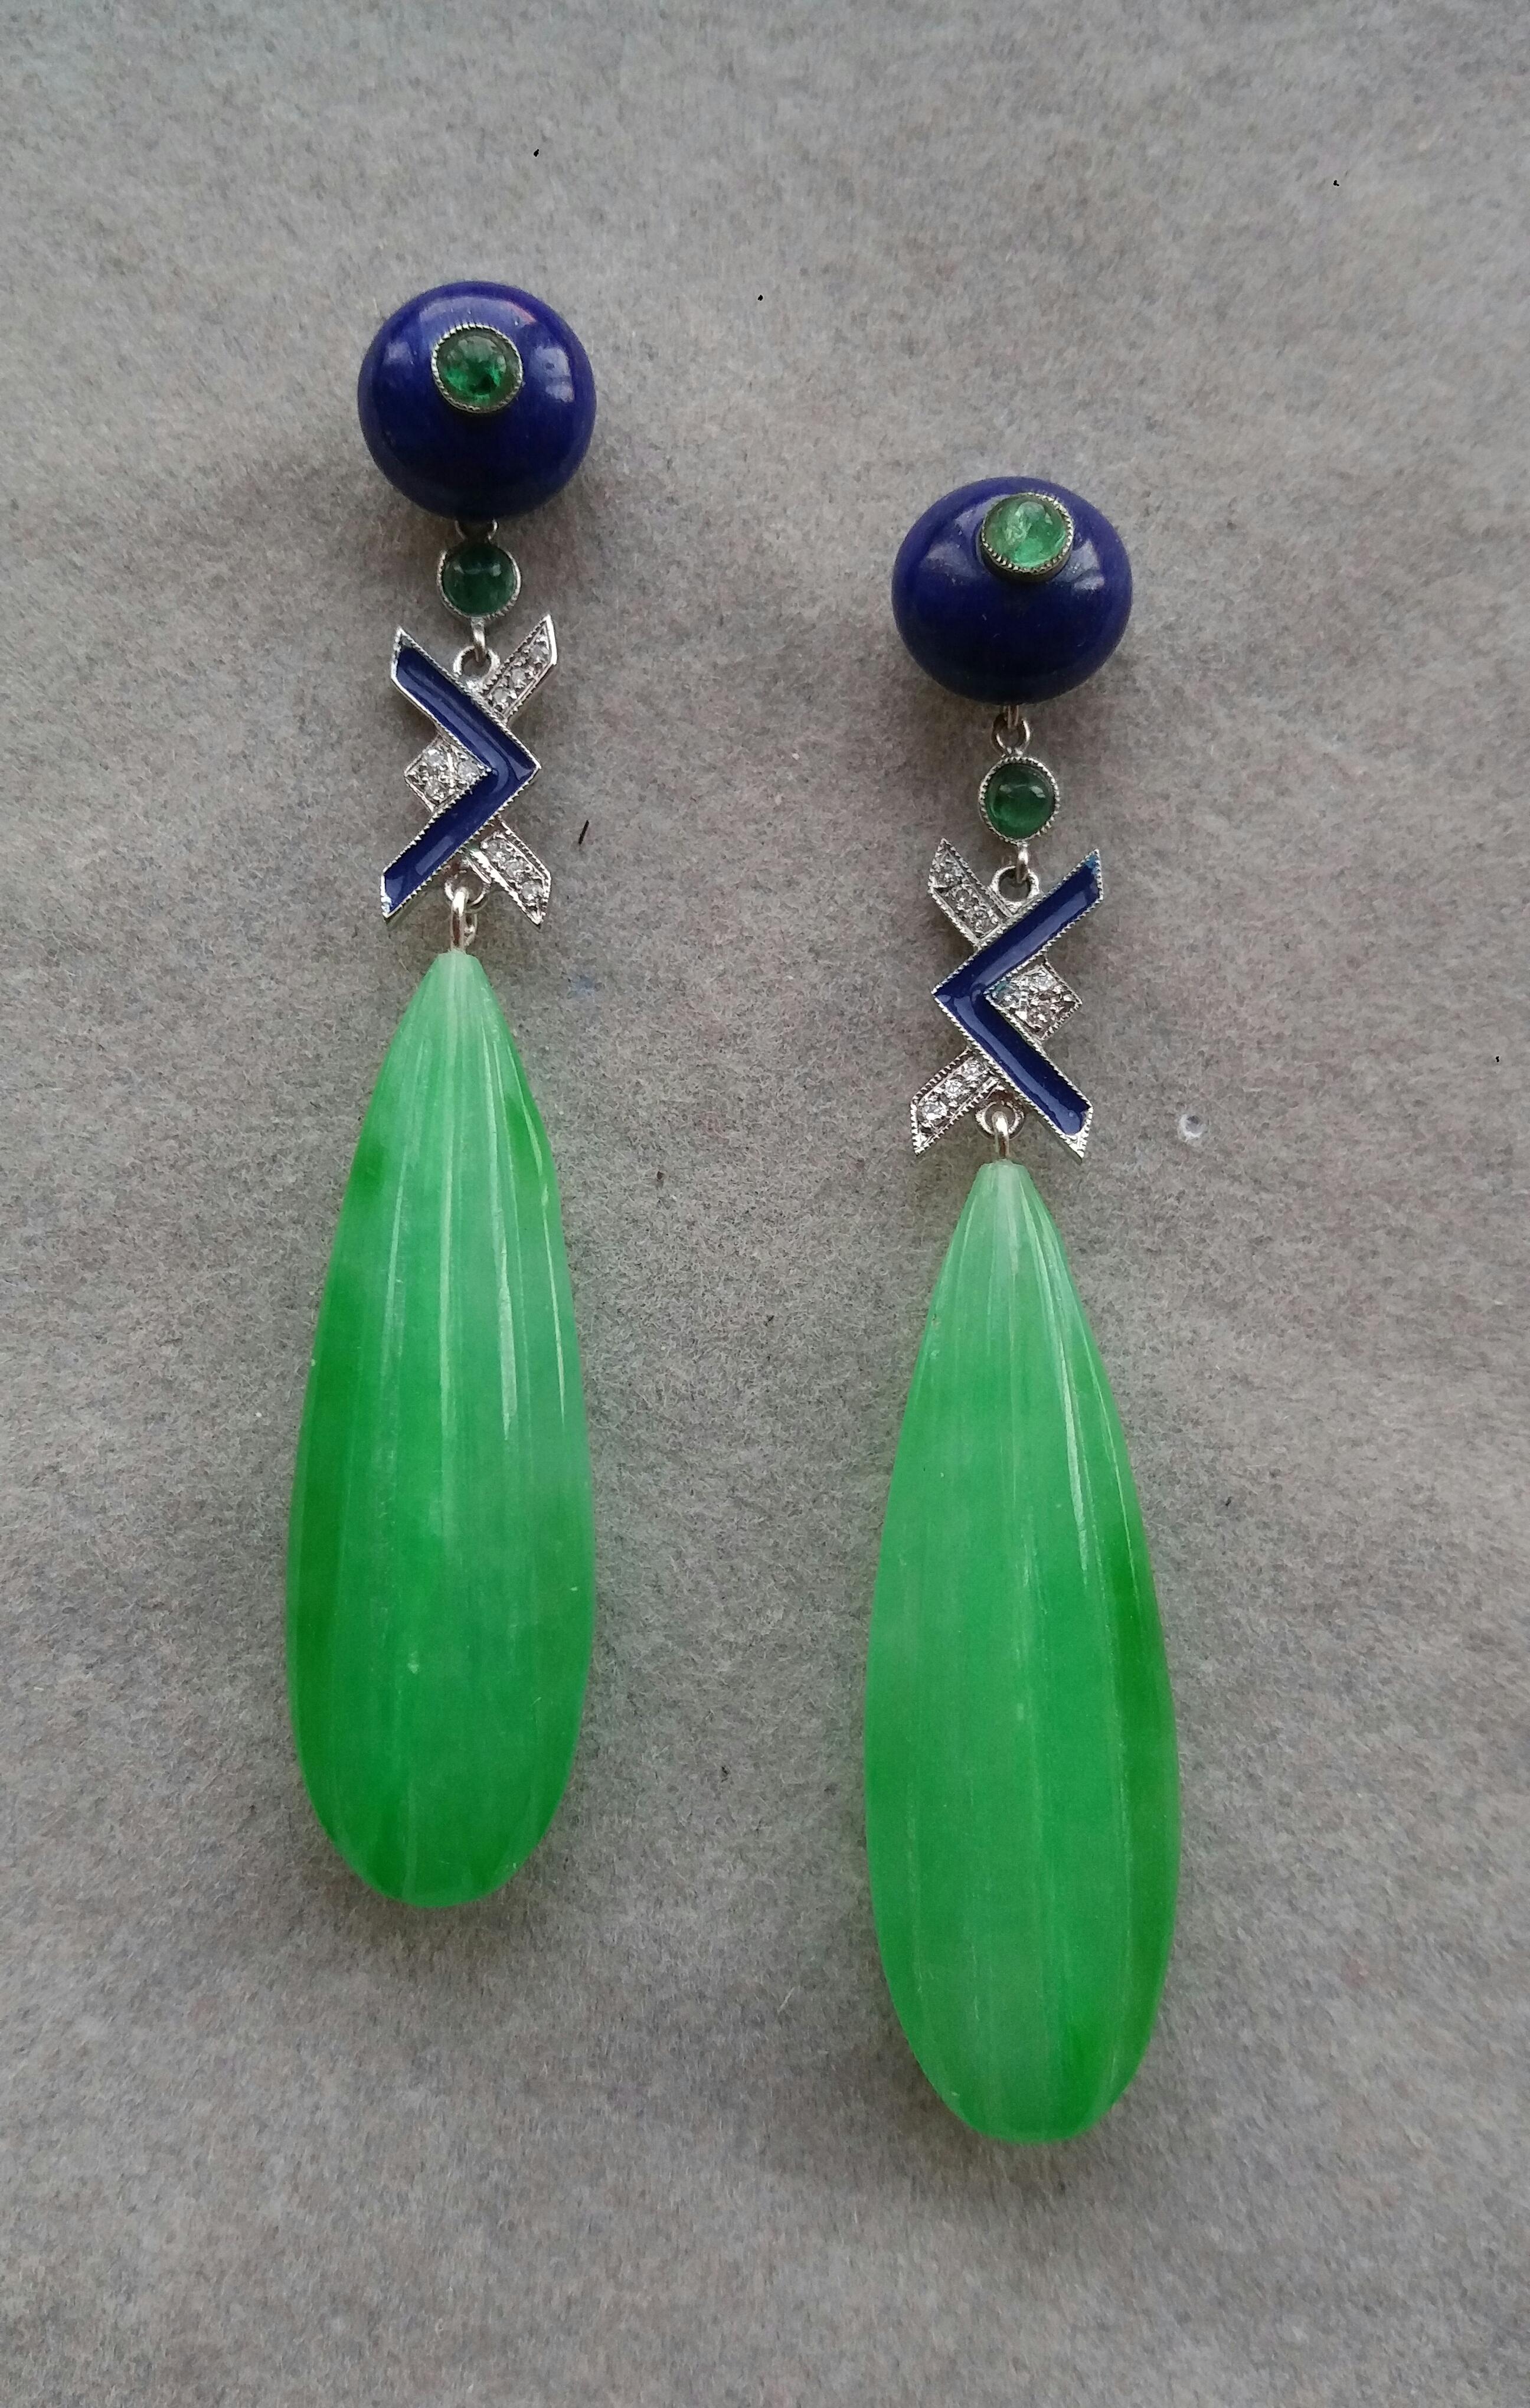 2 round Lapis Lazuli buttons with small Emerald round cabs in the center are on top, middle parts with 2 small round Emerald cabochons,white gold ,16 round full cut diamonds,blue enamel,then in the lower parts we have 2 engraved Jade drops 40 mm